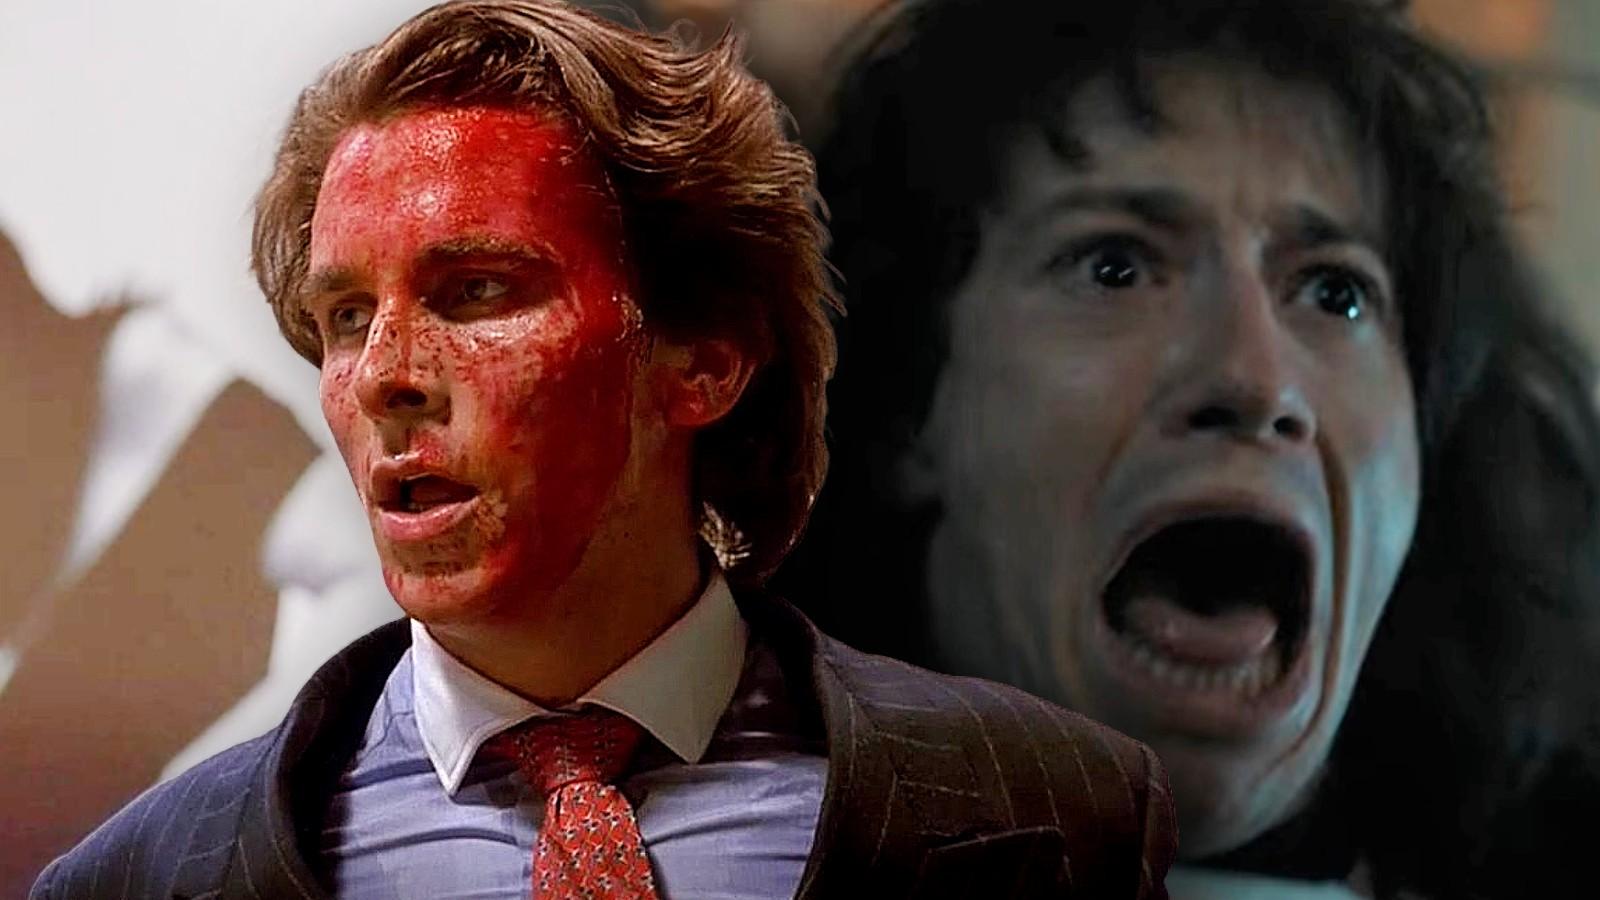 American Psycho author making first horror movie with Stranger Things star  - Dexerto